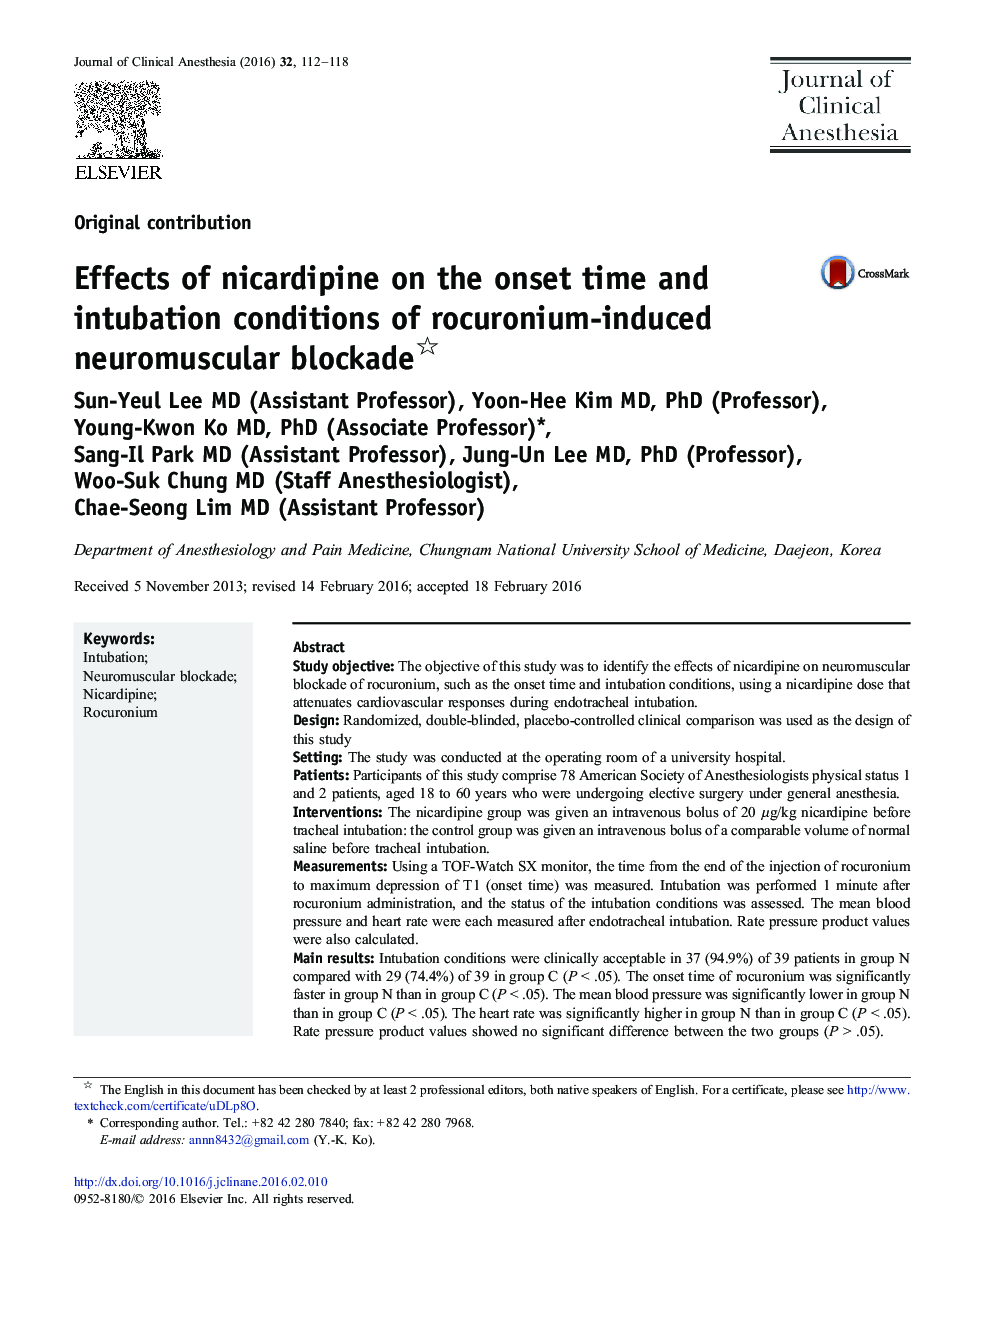 Effects of nicardipine on the onset time and intubation conditions of rocuronium-induced neuromuscular blockade